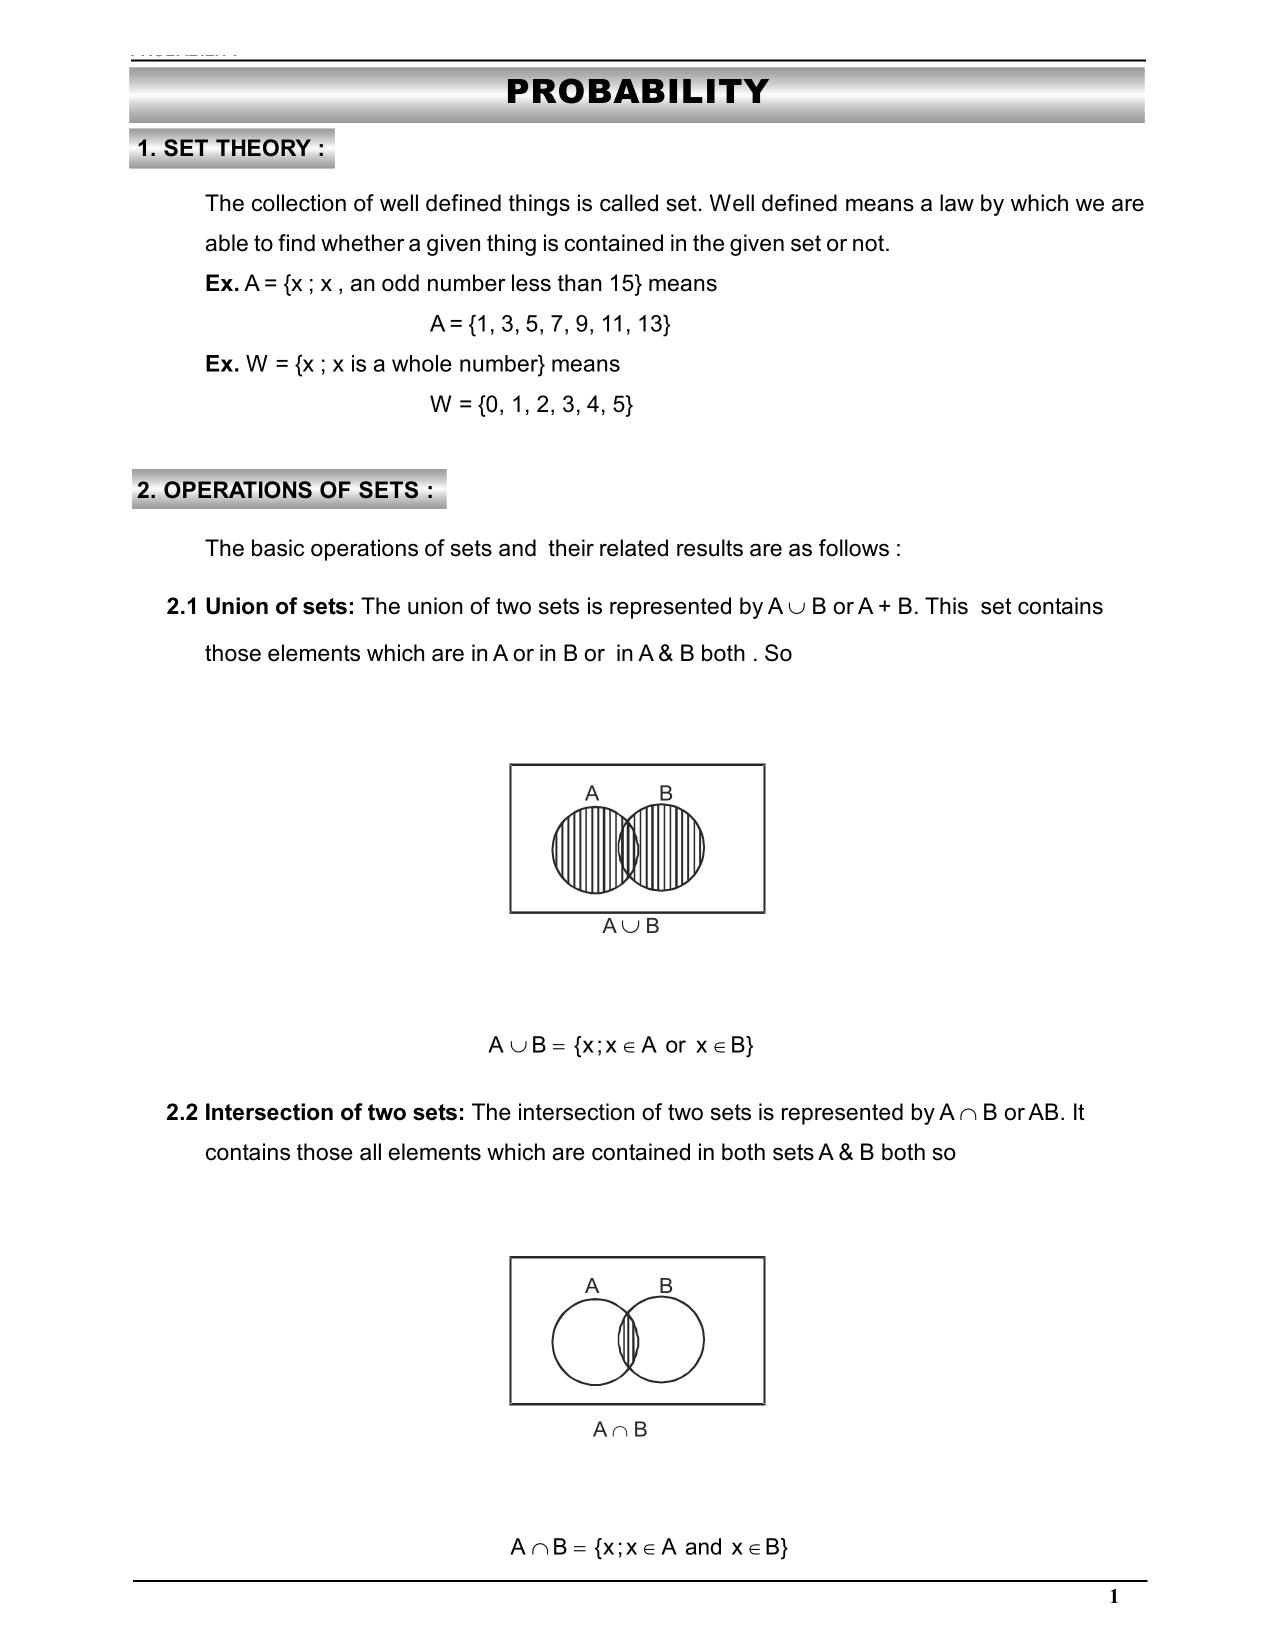 Probability Notes for Class 11 